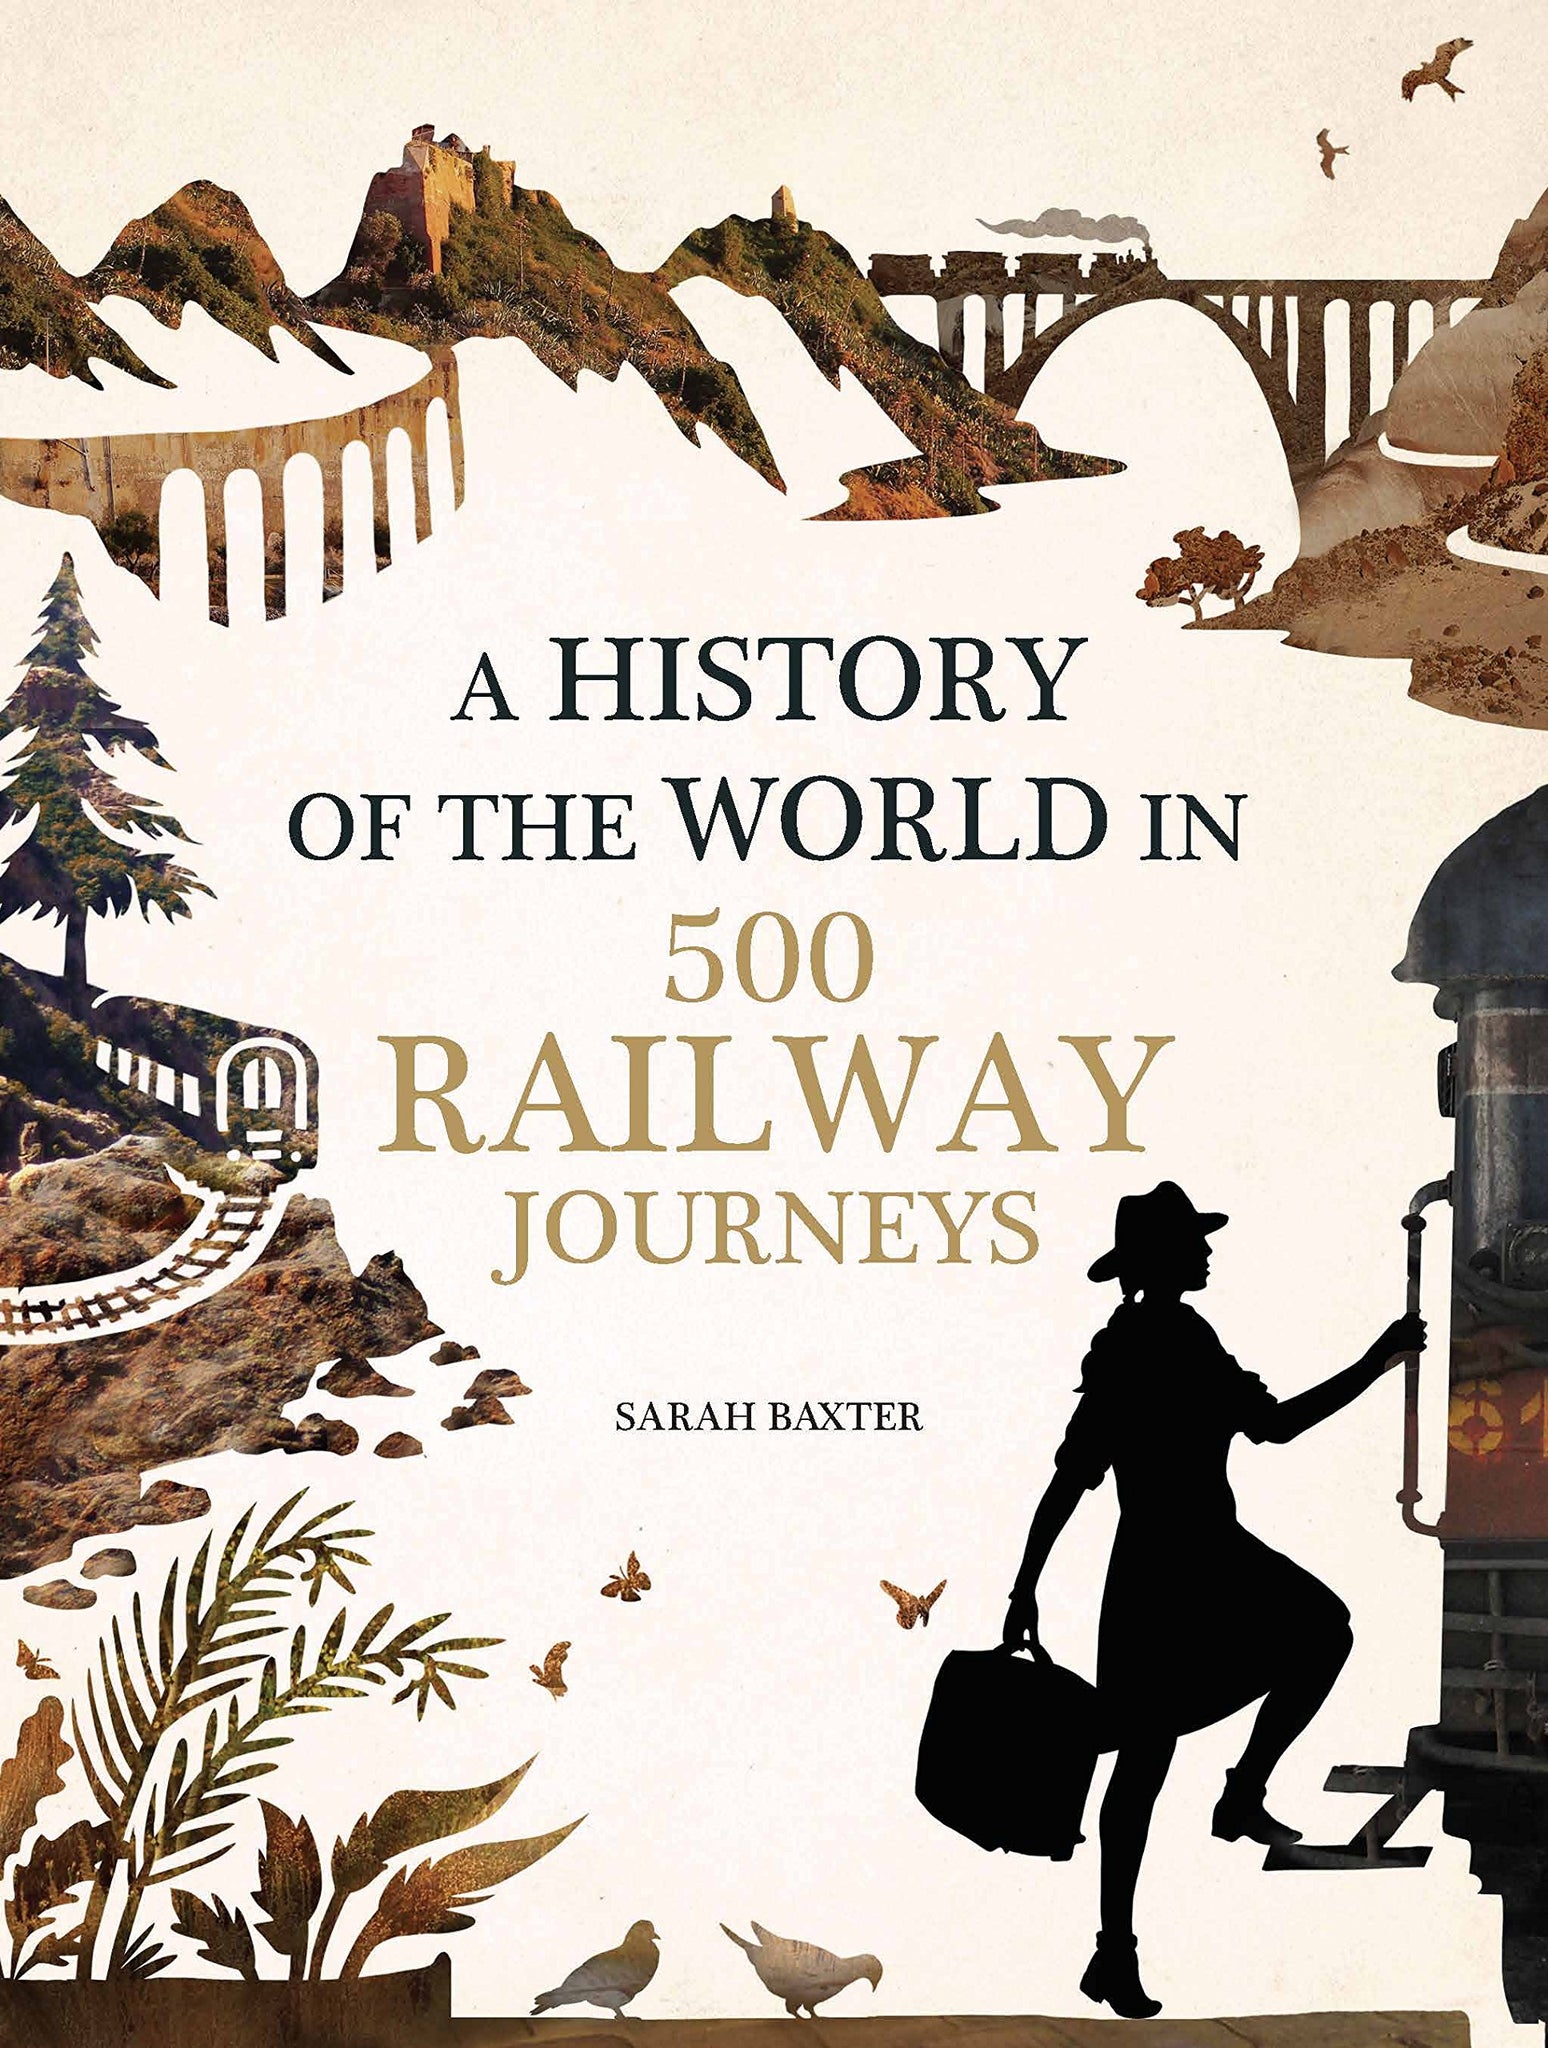 A History Of The World In 500 Railway Journeys